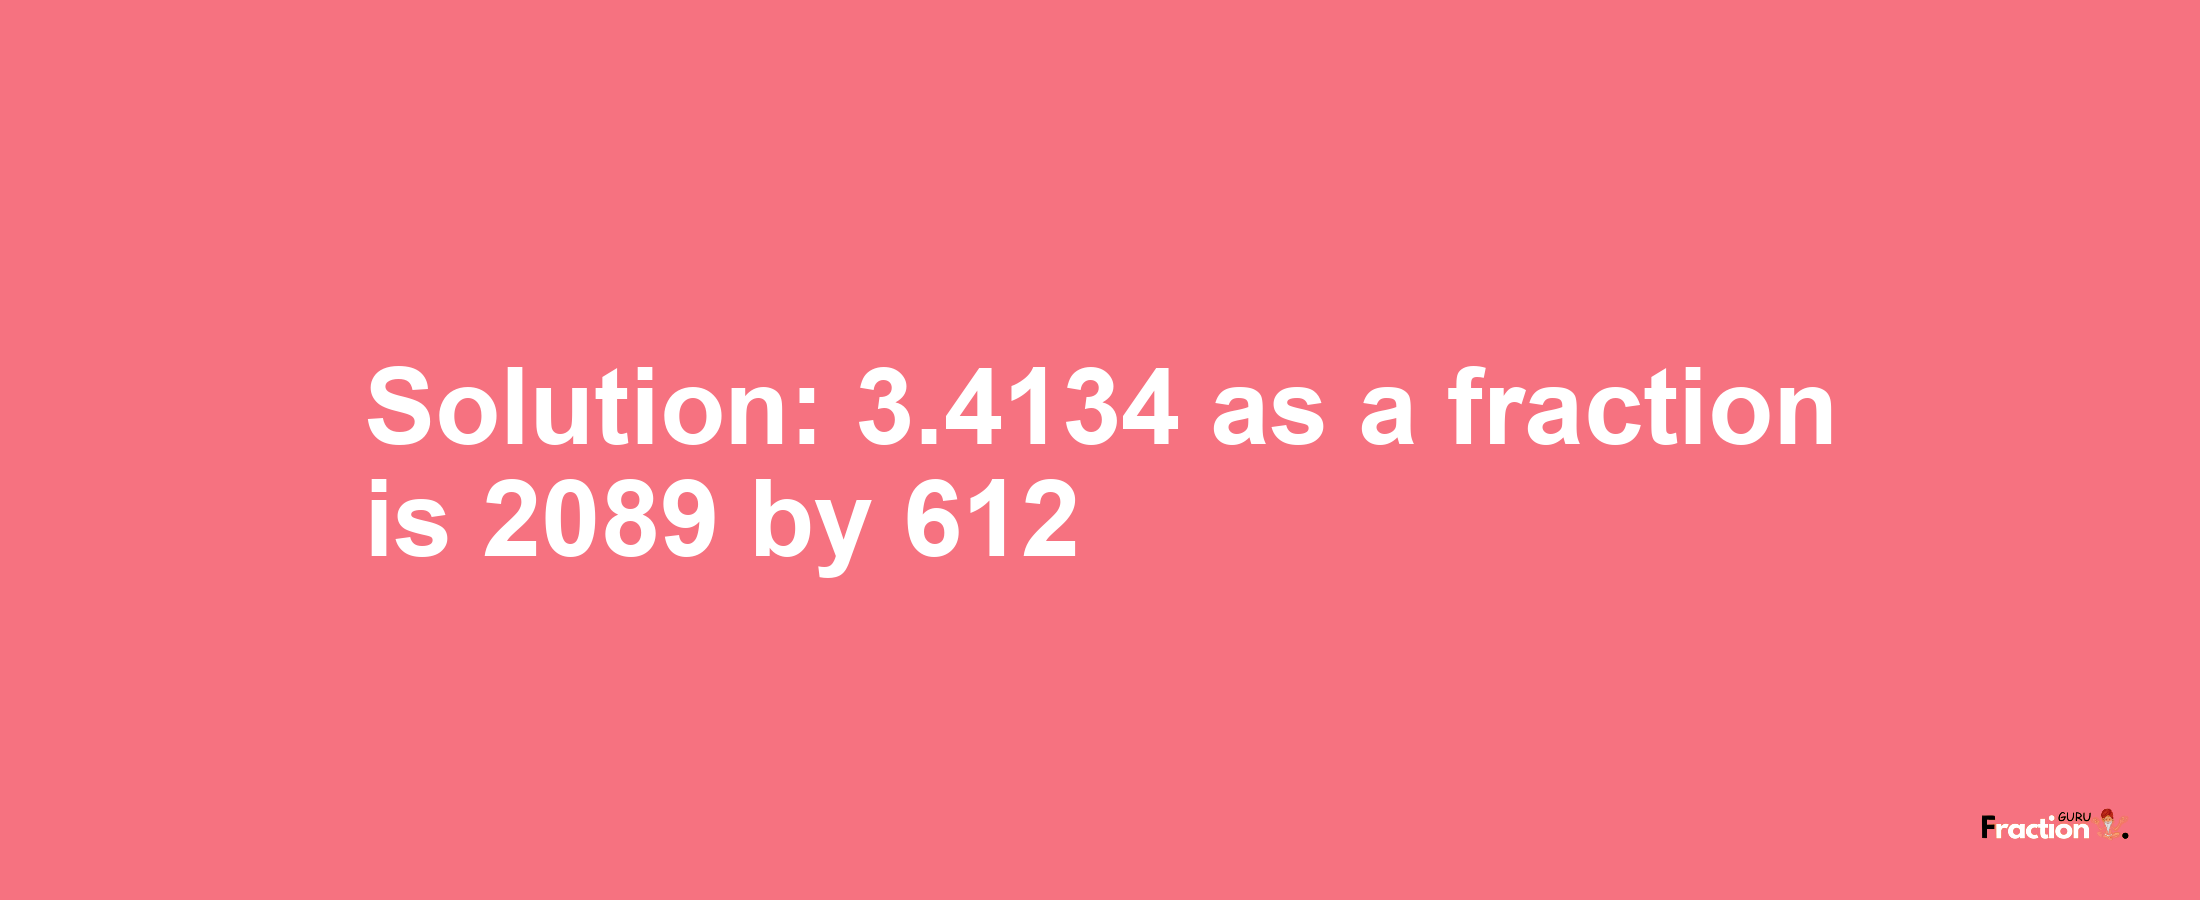 Solution:3.4134 as a fraction is 2089/612